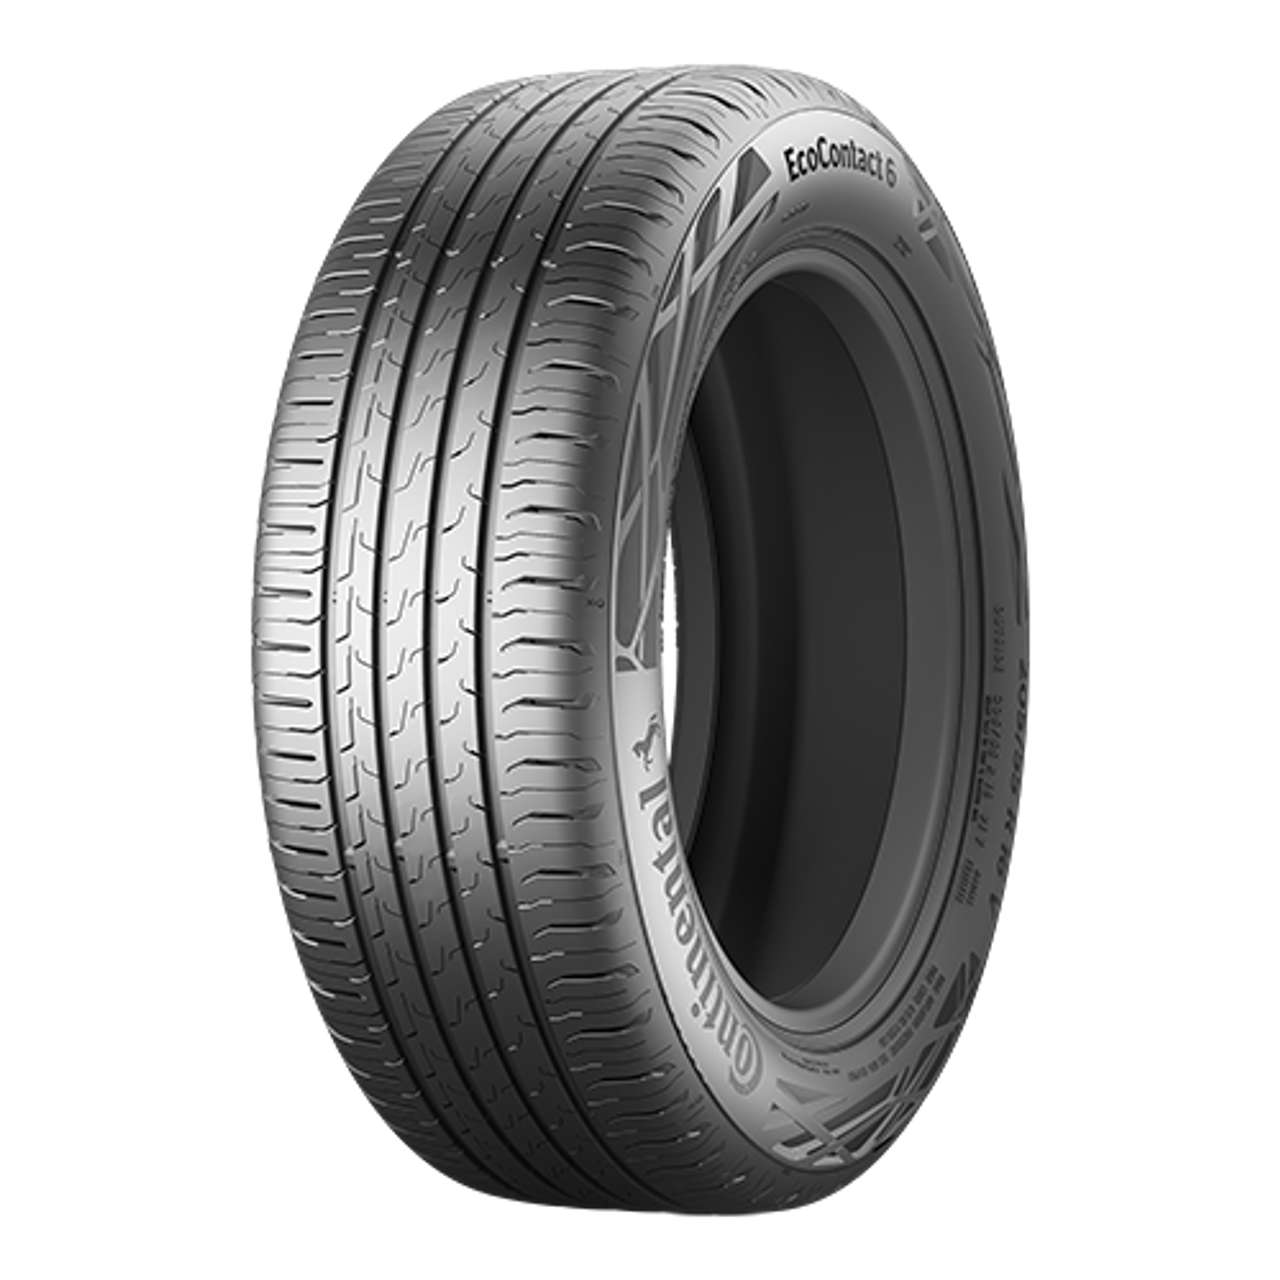 CONTINENTAL ECOCONTACT 6 (EVc) 195/65R15 91V CRM (CONTIRE.TEX) BSW